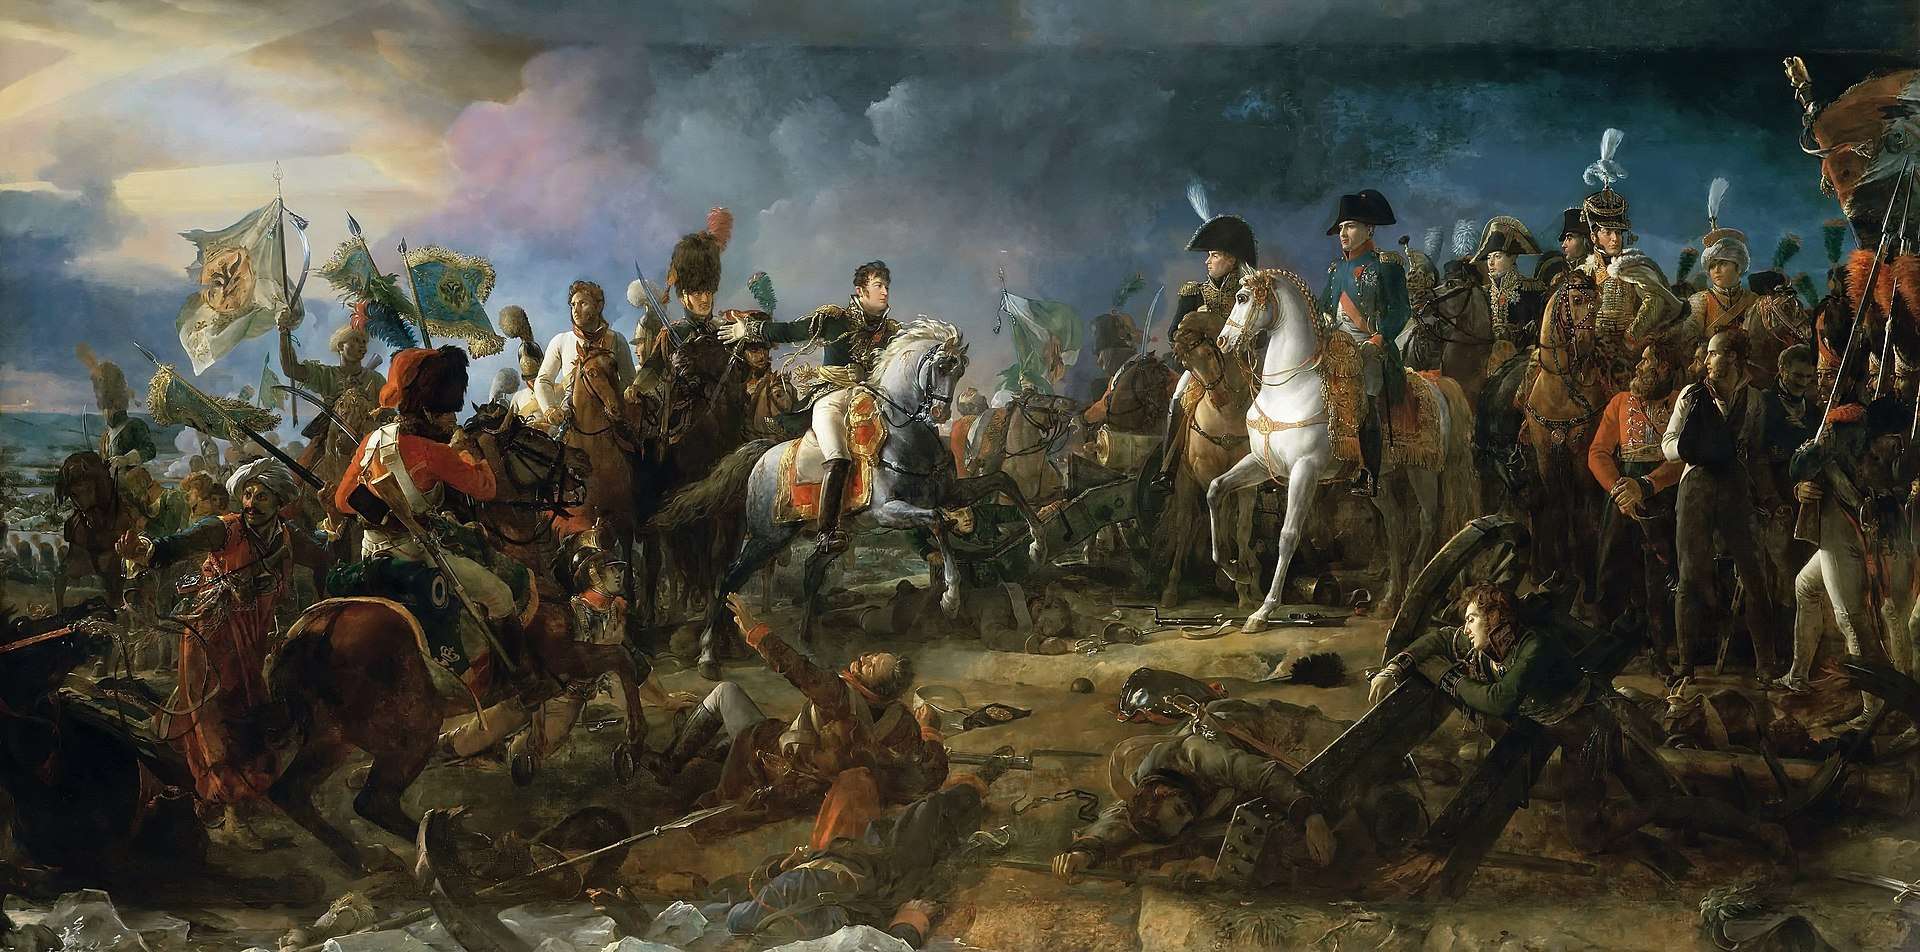 Napoleon at the Battle of Austerlitz, by François Gérard 1805. The Battle of Austerlitz, also known as the Battle of the Three Emperors, was one of Napoleon's many victories, where the French Empire defeated the Third Coalition.